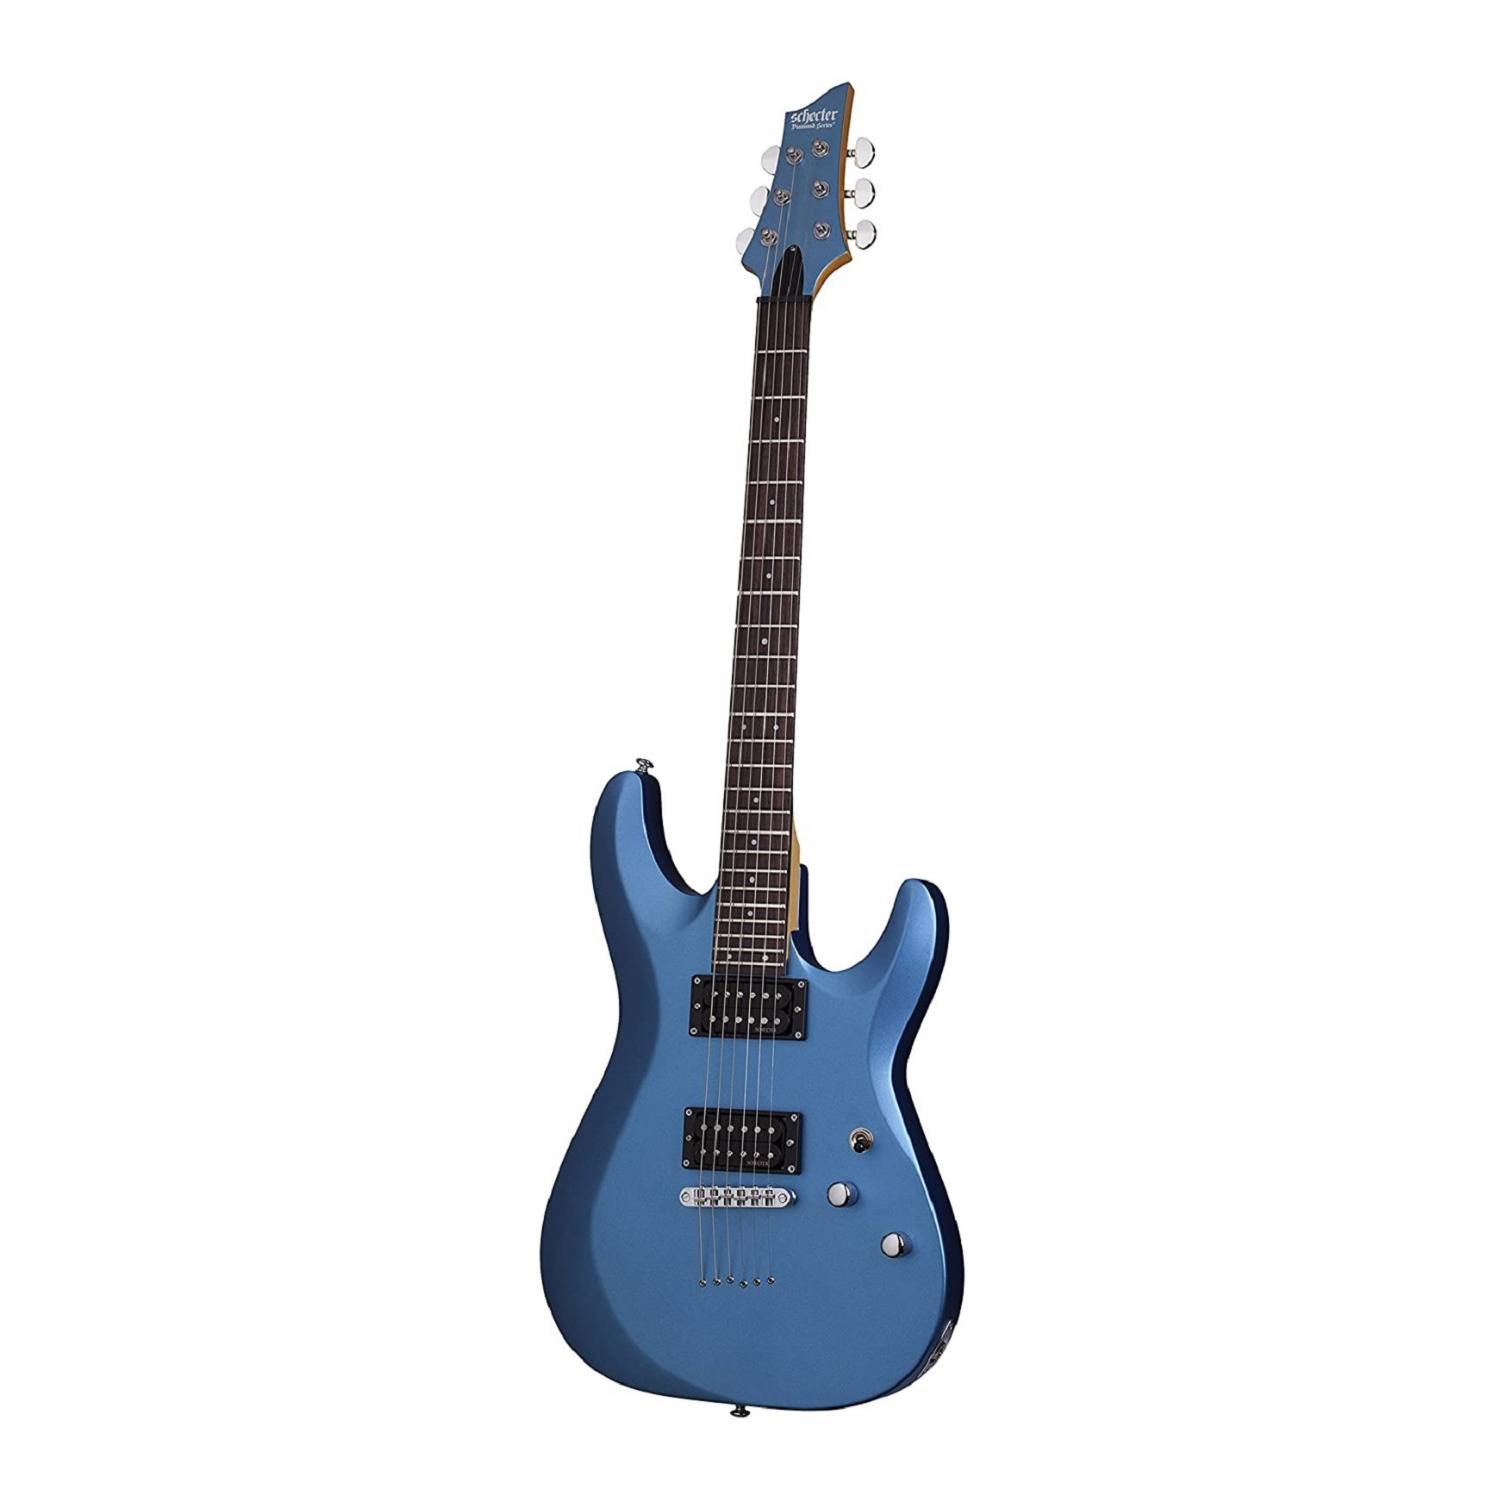 Schecter C-6 Deluxe 6-String Electric Guitar (Right-Hand, Satin Metallic Light Blue)